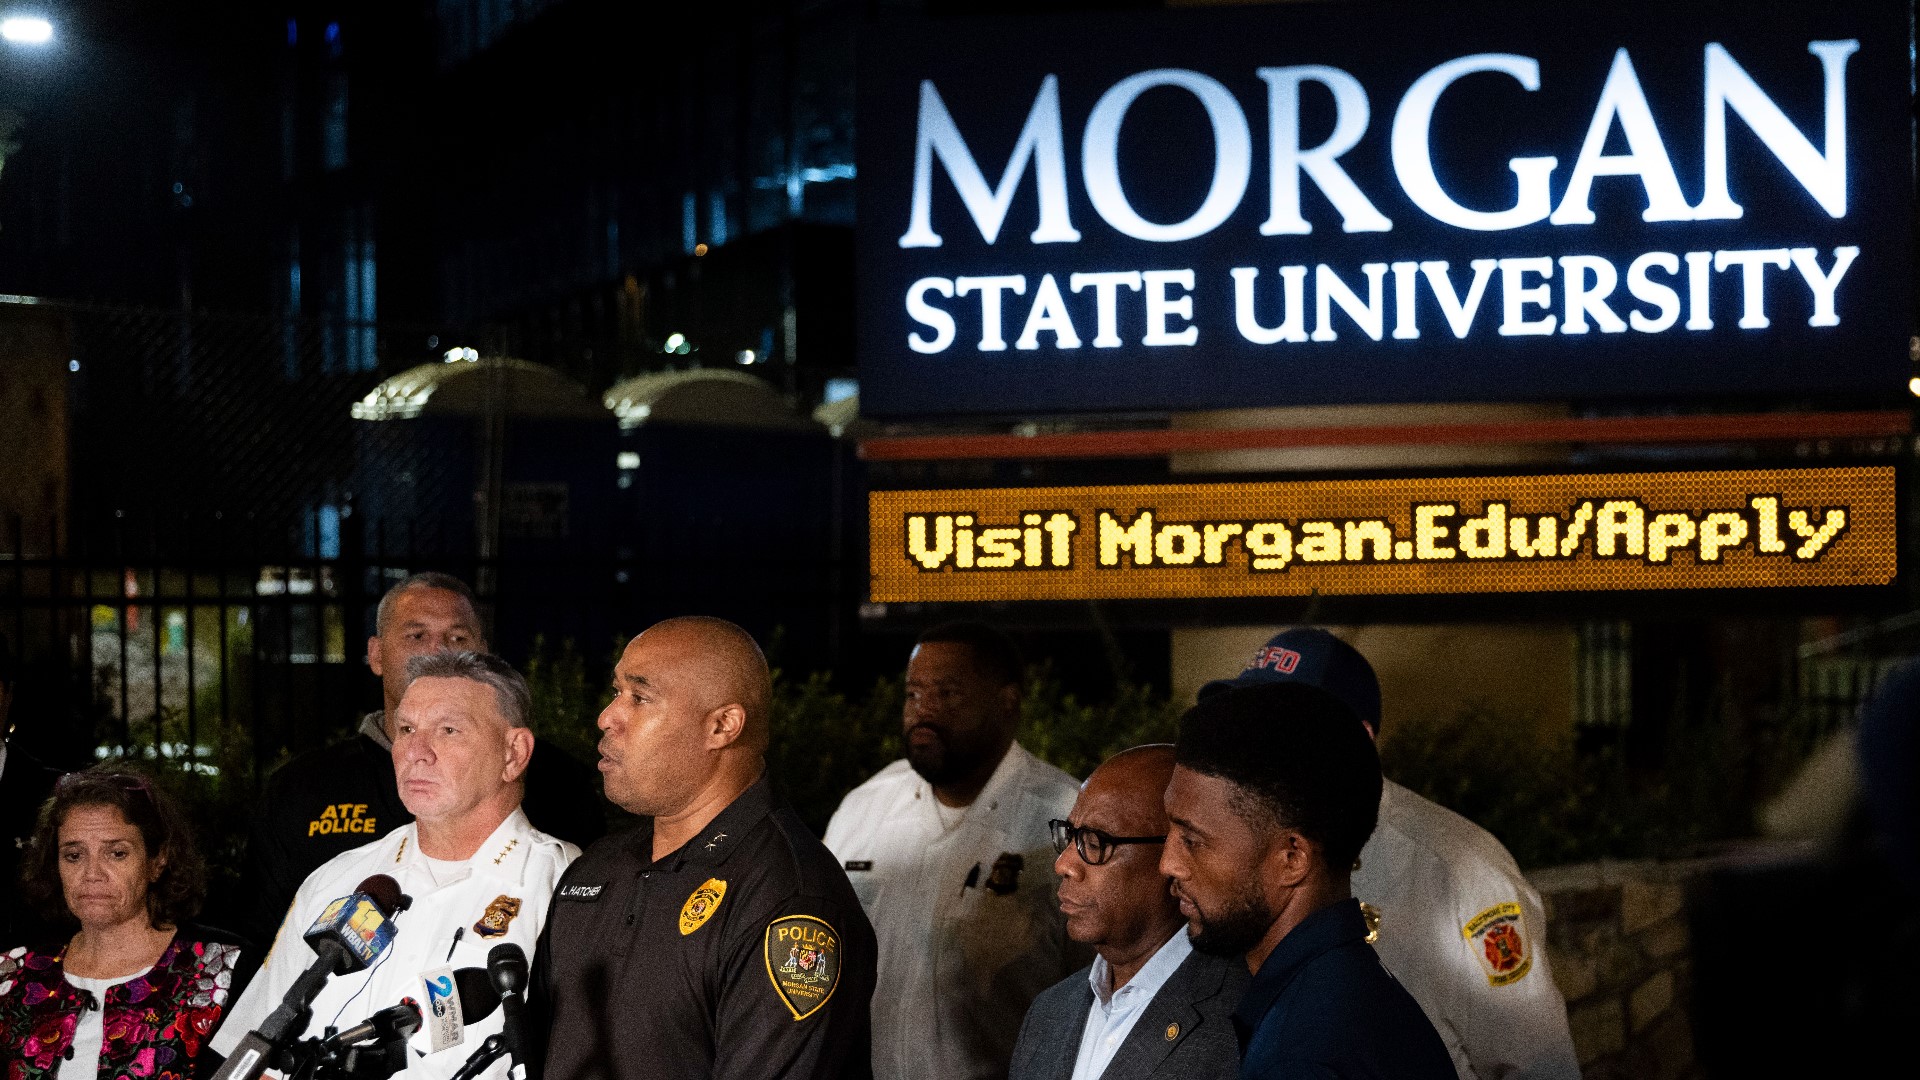 A shooter on the campus of Morgan State University shot and injured five people—four of them students—on Tuesday night, according to authorities.